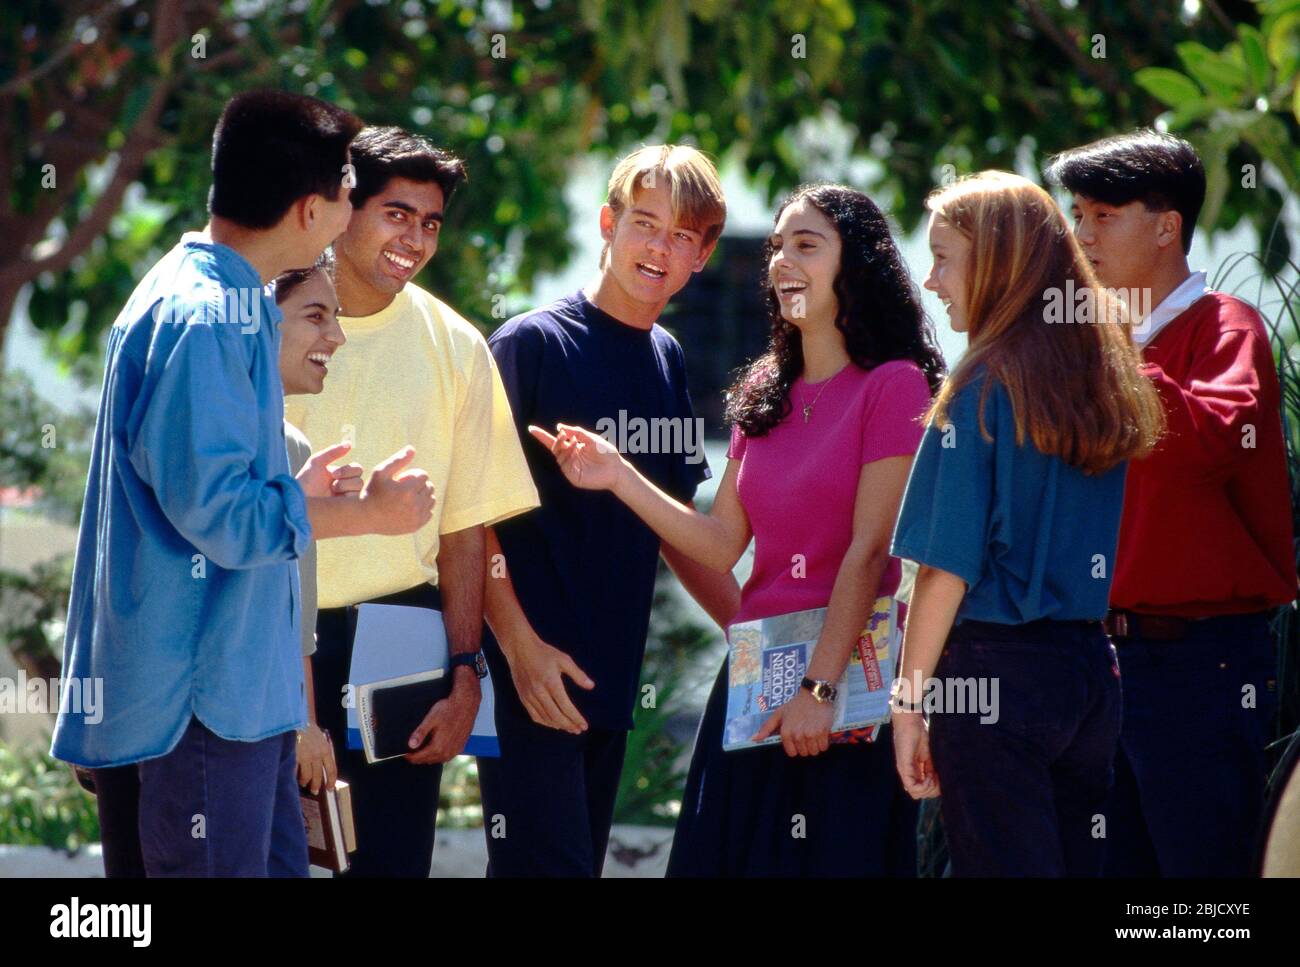 School students multicultural group of 7 happy attractive teenage senior school college high school multicultural students in colourful t shirts relaxing talking and interacting outside in a sunny school college campus environment Stock Photo